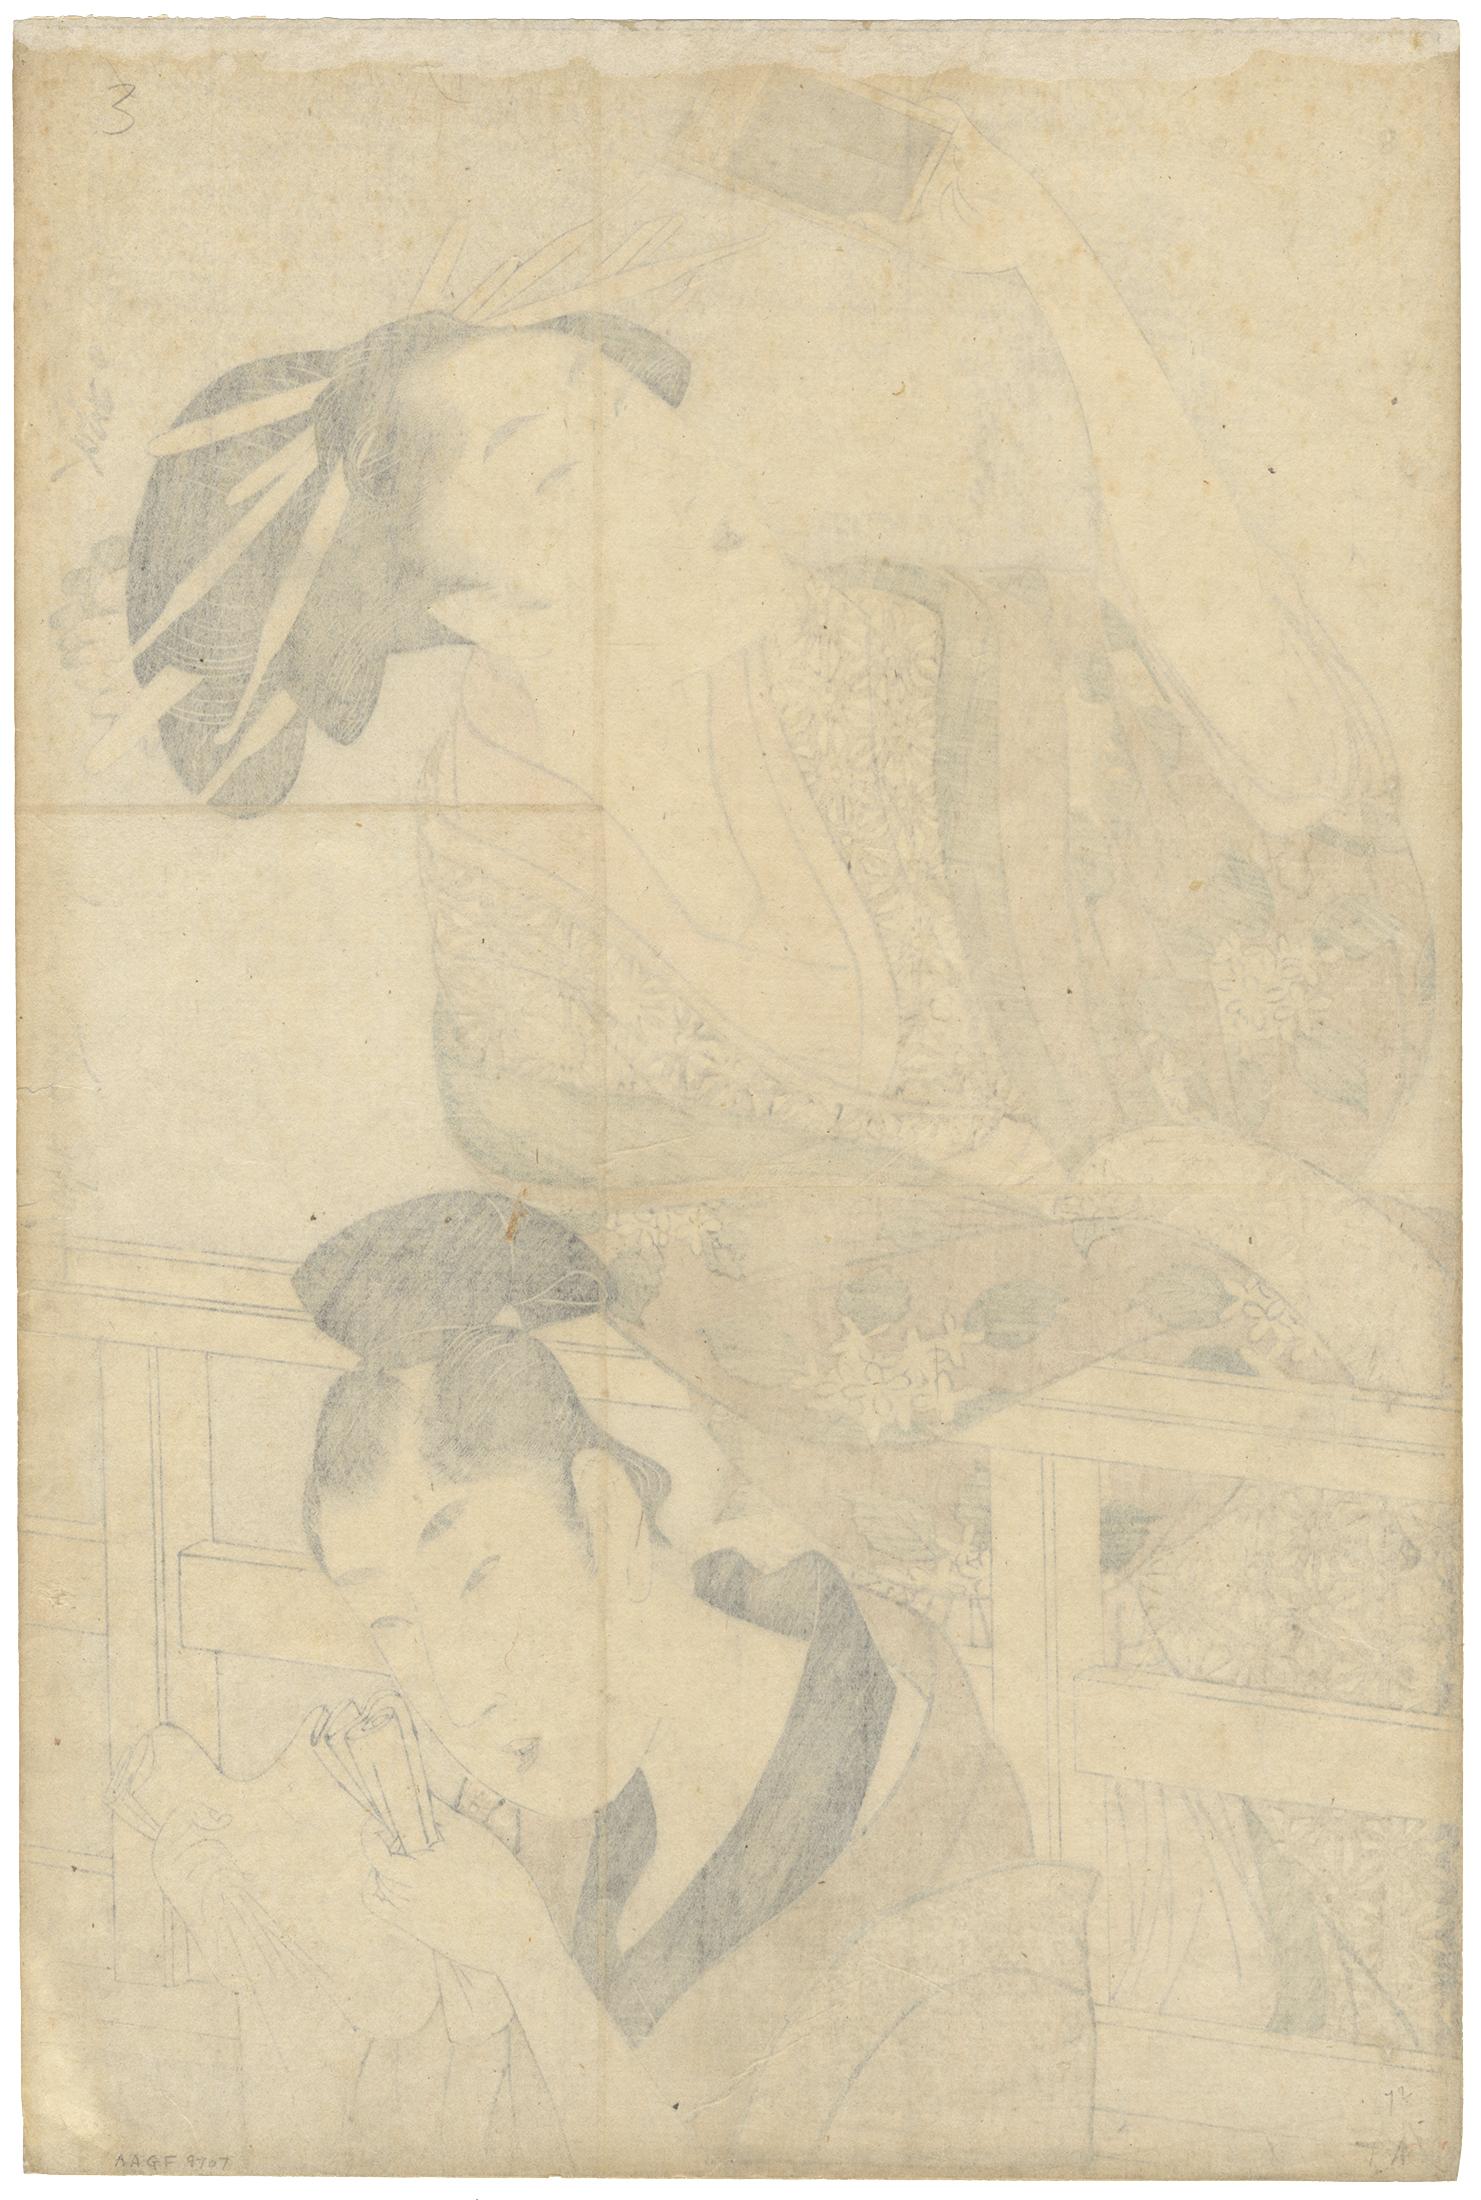 Artist: Utamaro Kitagawa (1753 - 1806)
Title: A Parody of Act VII of Chushingura
Series: Eight Views of Courtesans with Mirrors
Date: Late 18th century
Dimensions: 25.1 x 37.4 cm.

Act VII of the Kanedon Chushingura is full of plot and